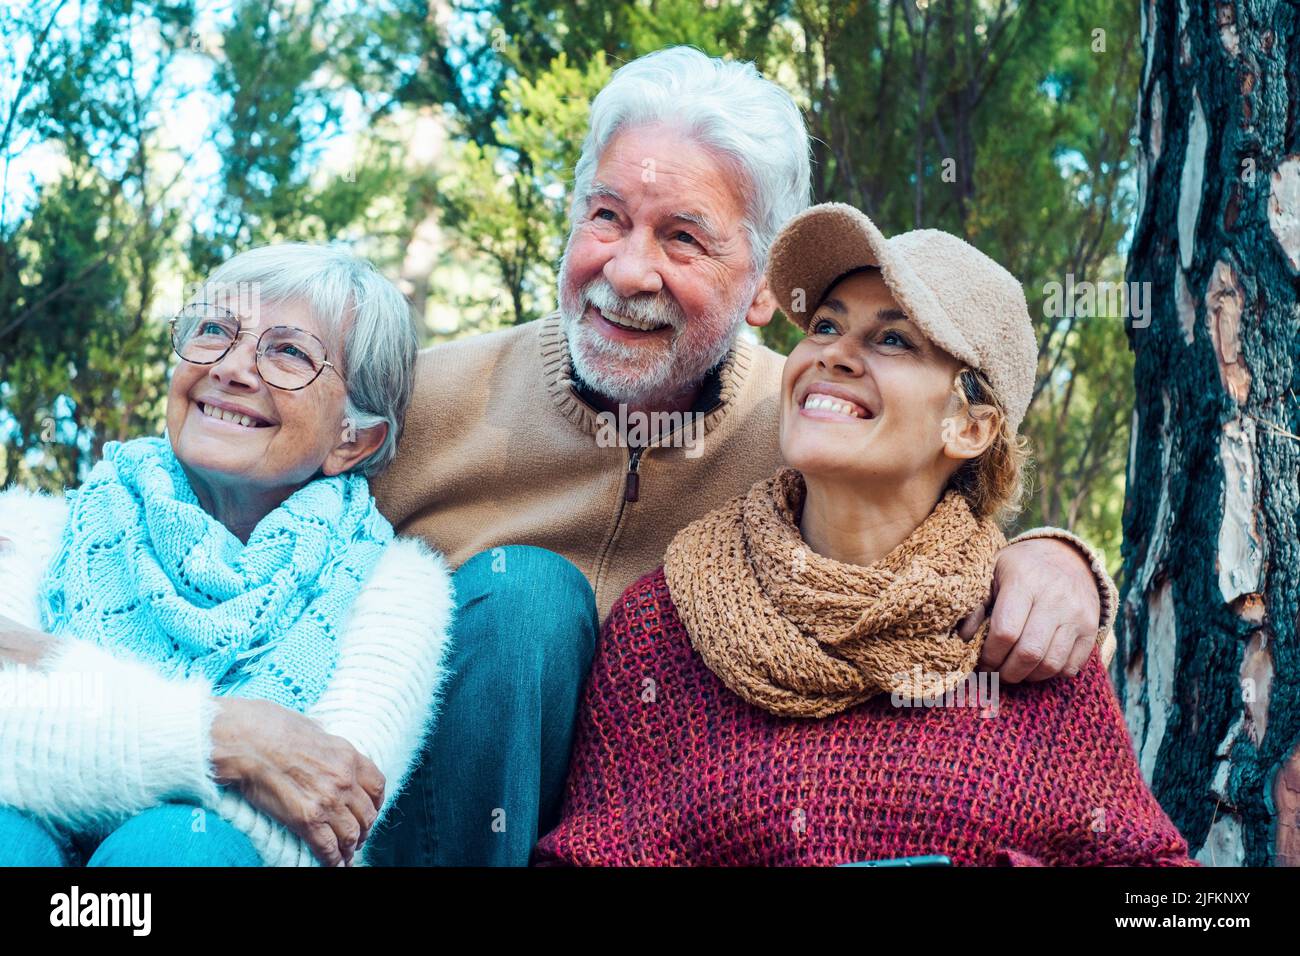 Caucasian family portrait smile and hug with nature trees forest background. Adult and mature retired people enjoying leisure activity outdoors Stock Photo